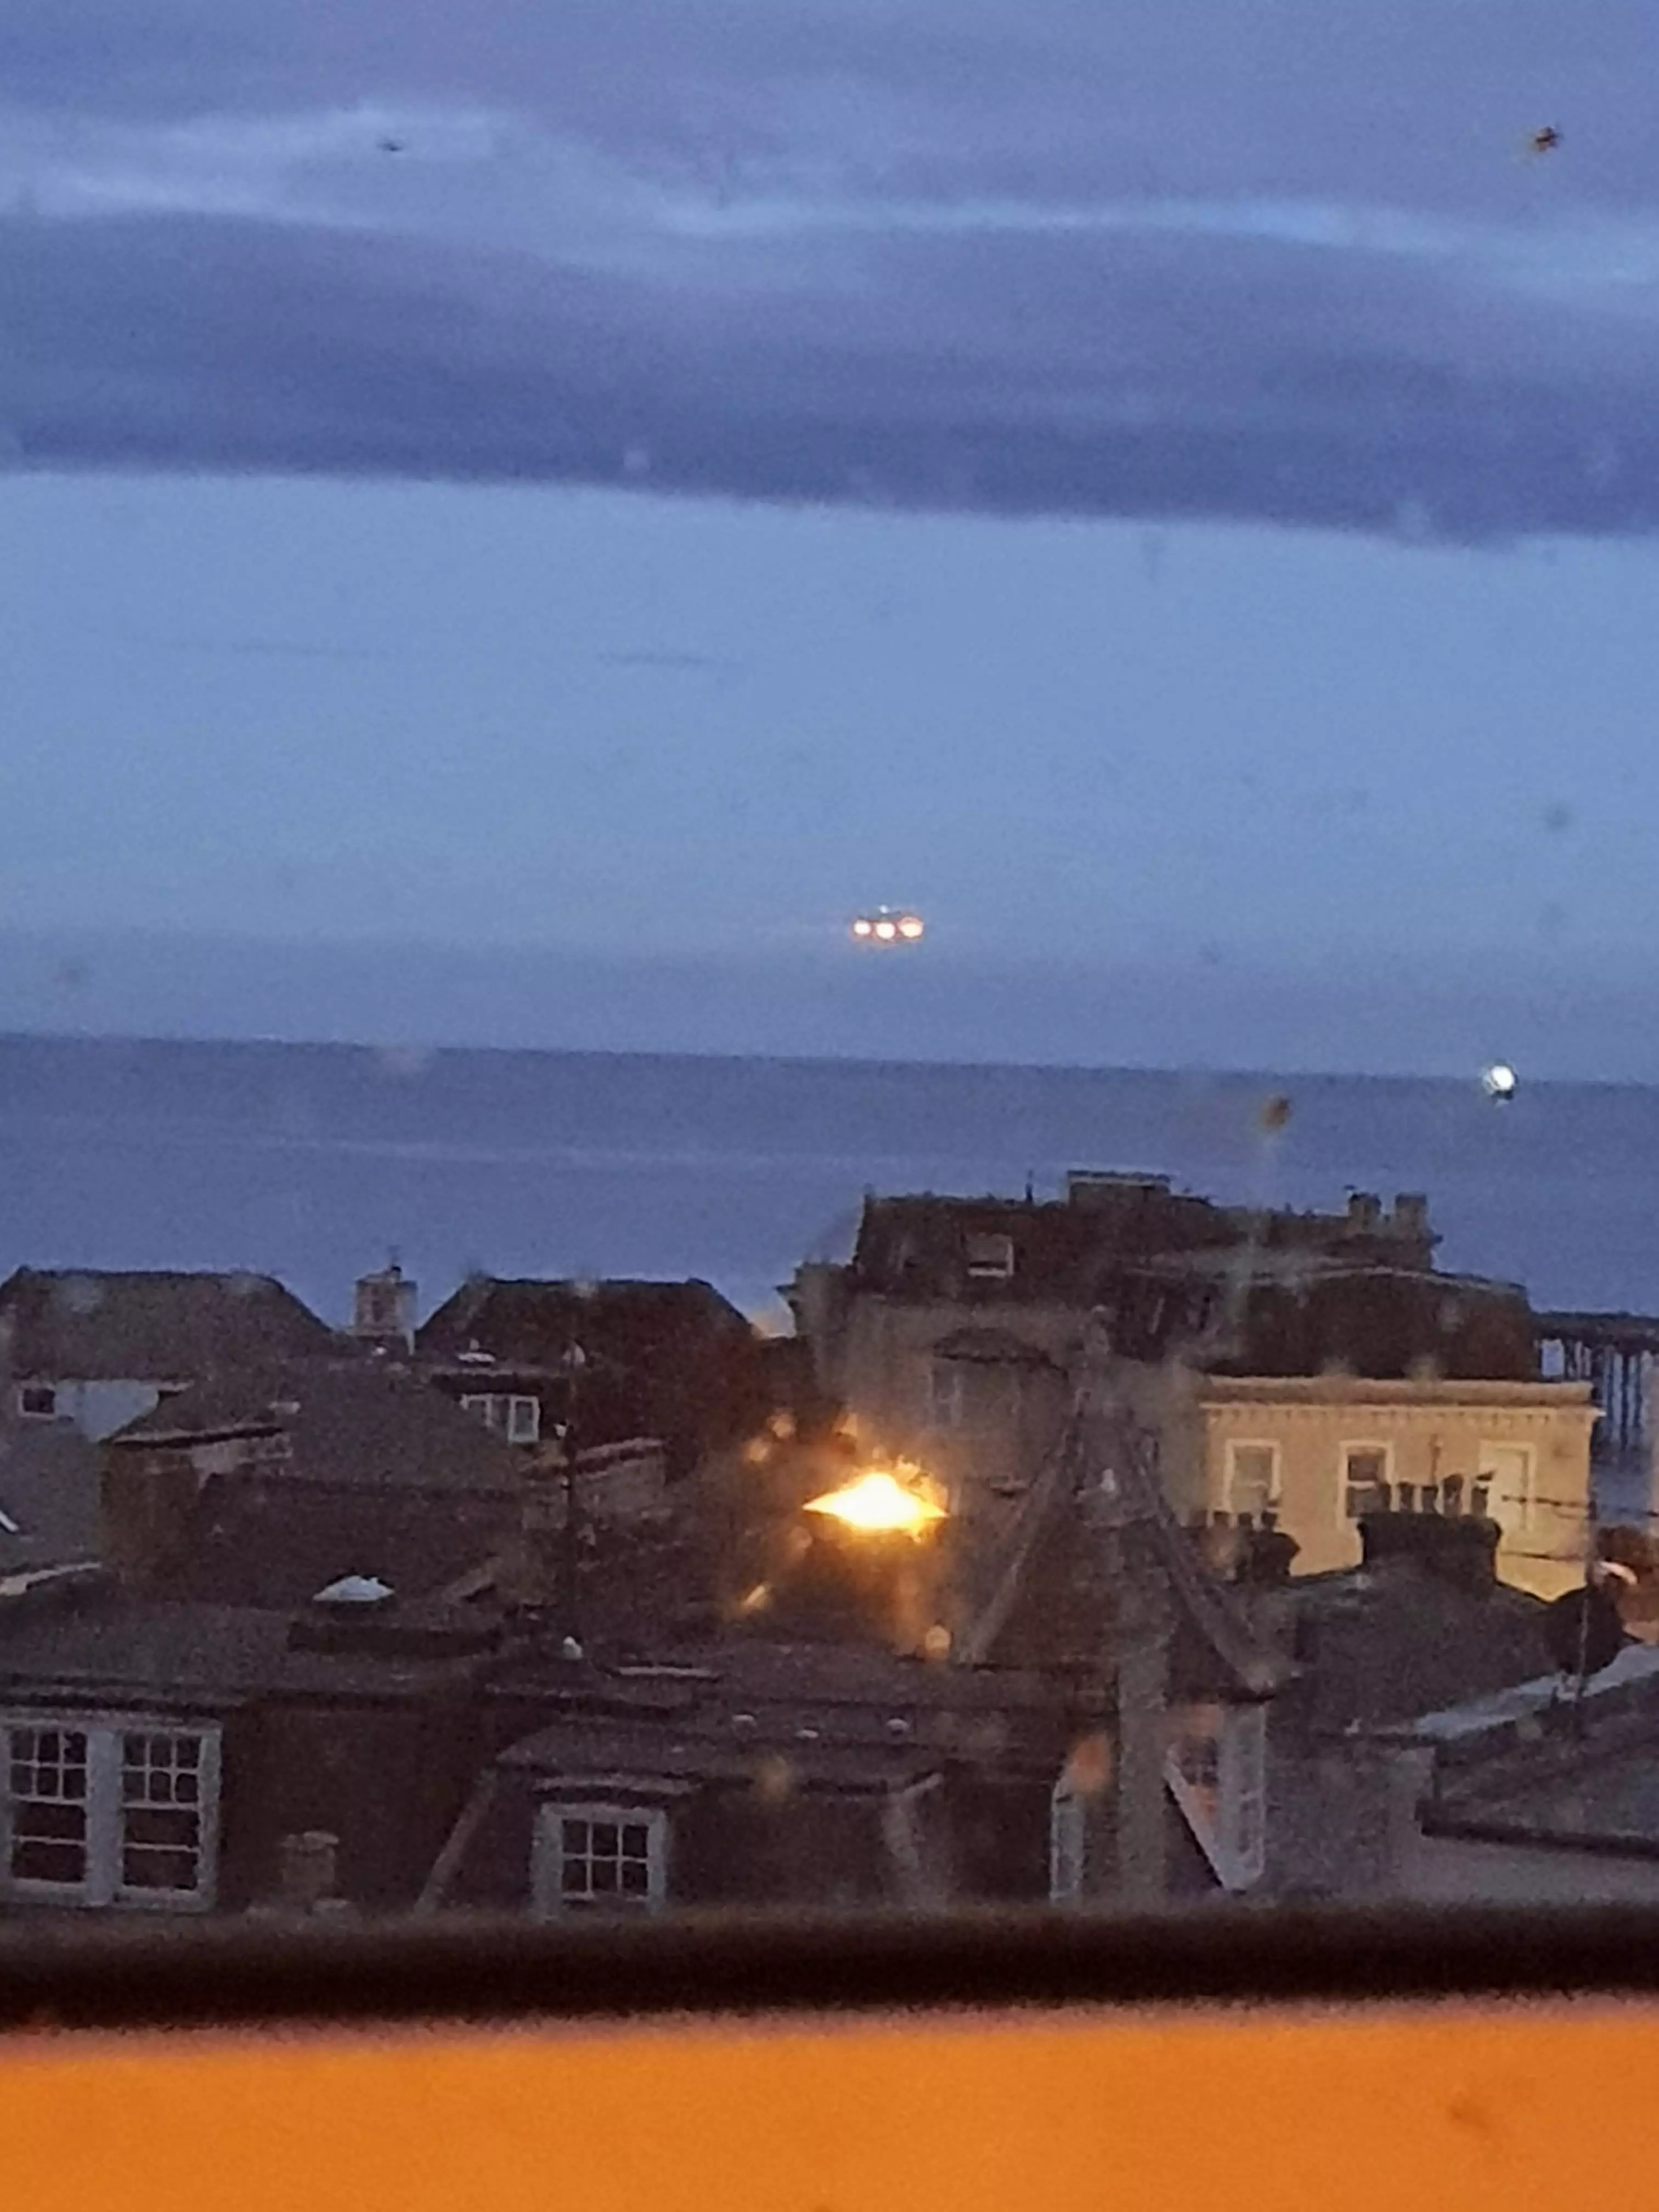 Ships can appear to hover over the horizon like this...